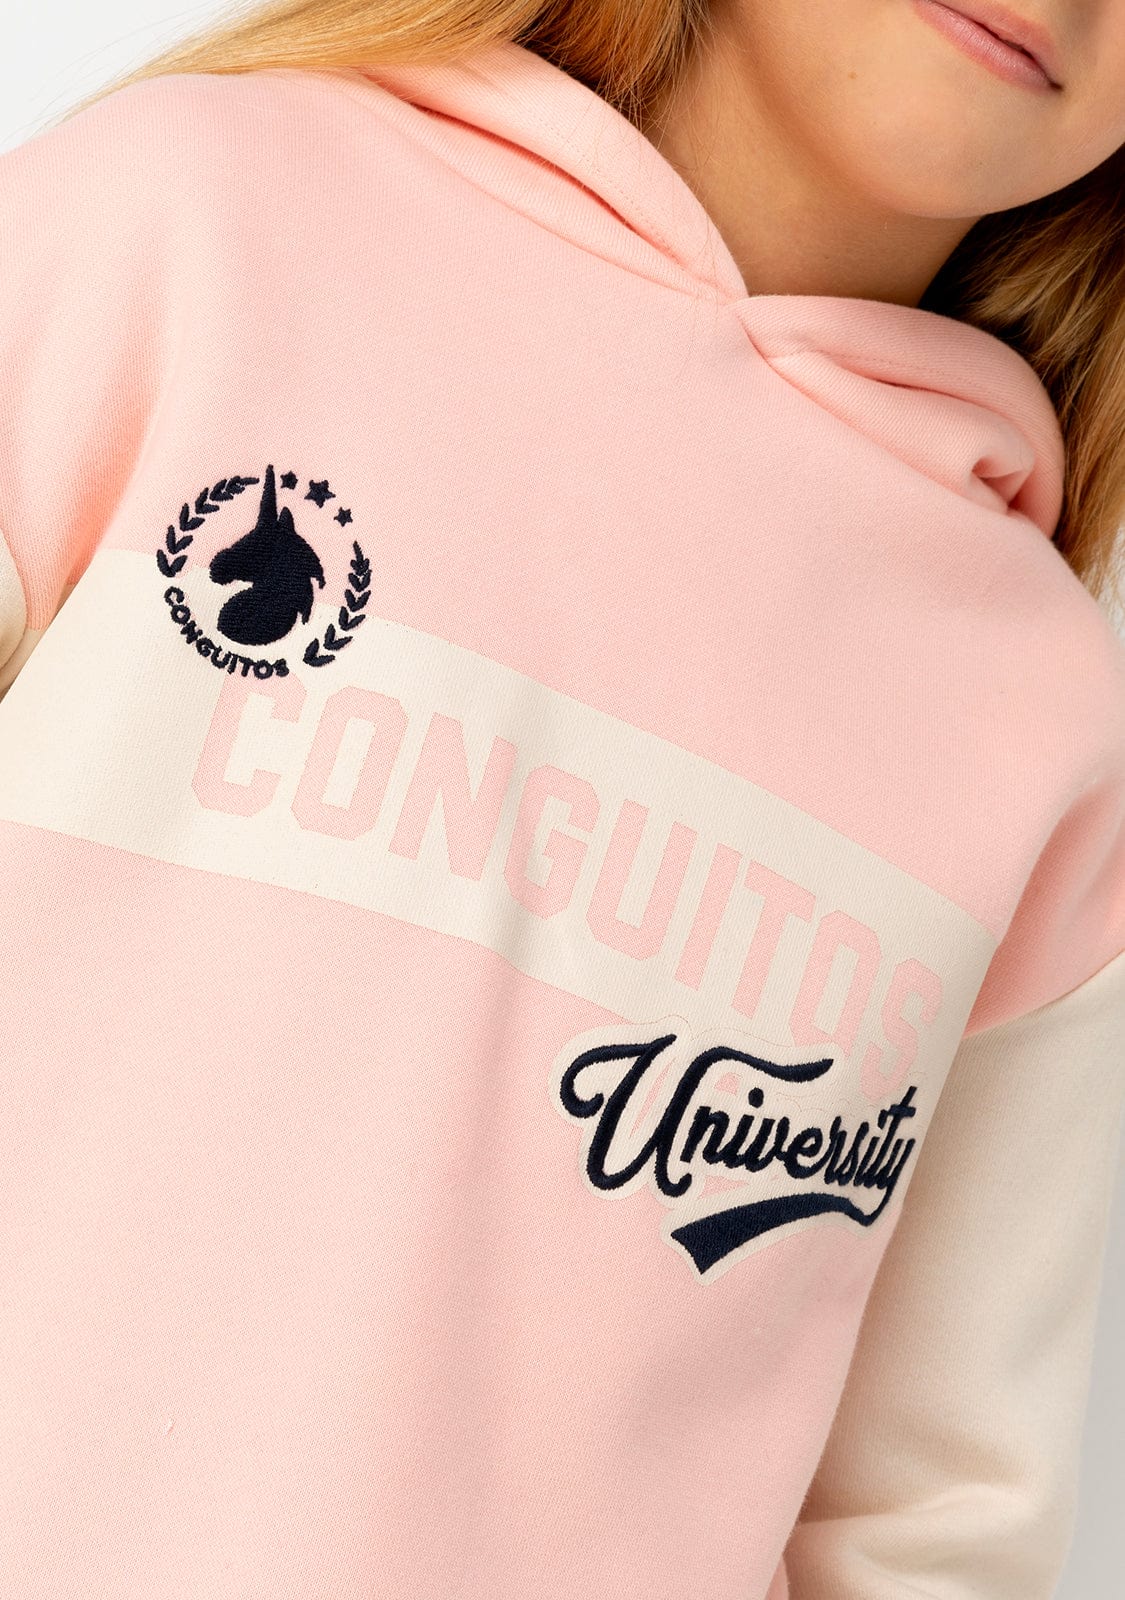 CONGUITOS TEXTIL Clothing Girl's Pink University Hoodie